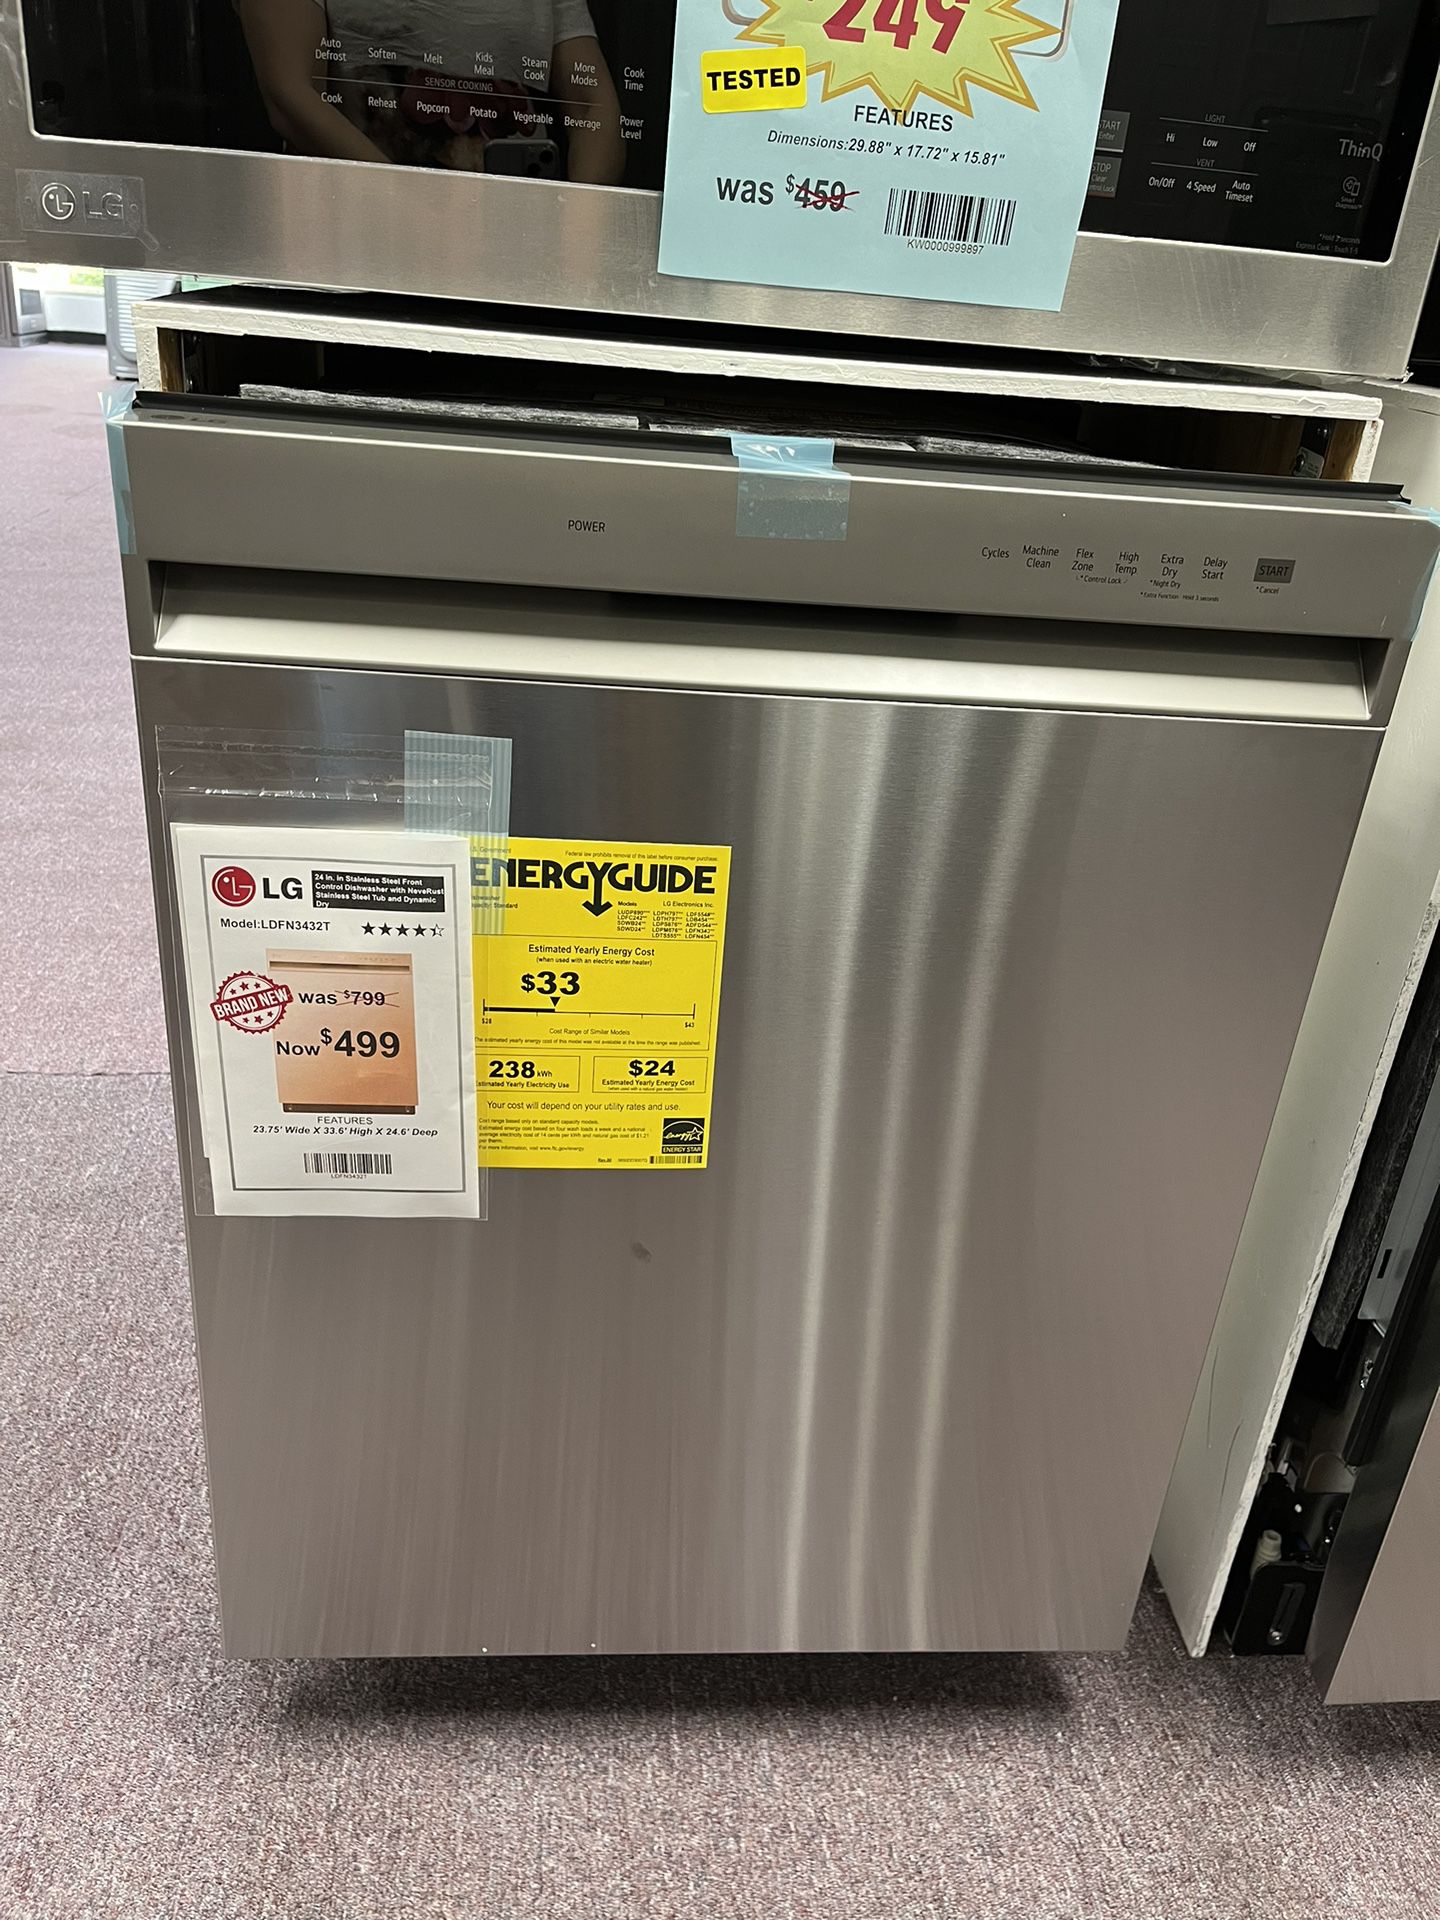 LG Brand New Dishwasher Stainless Steel 1 Year Warranty Delivery Service 